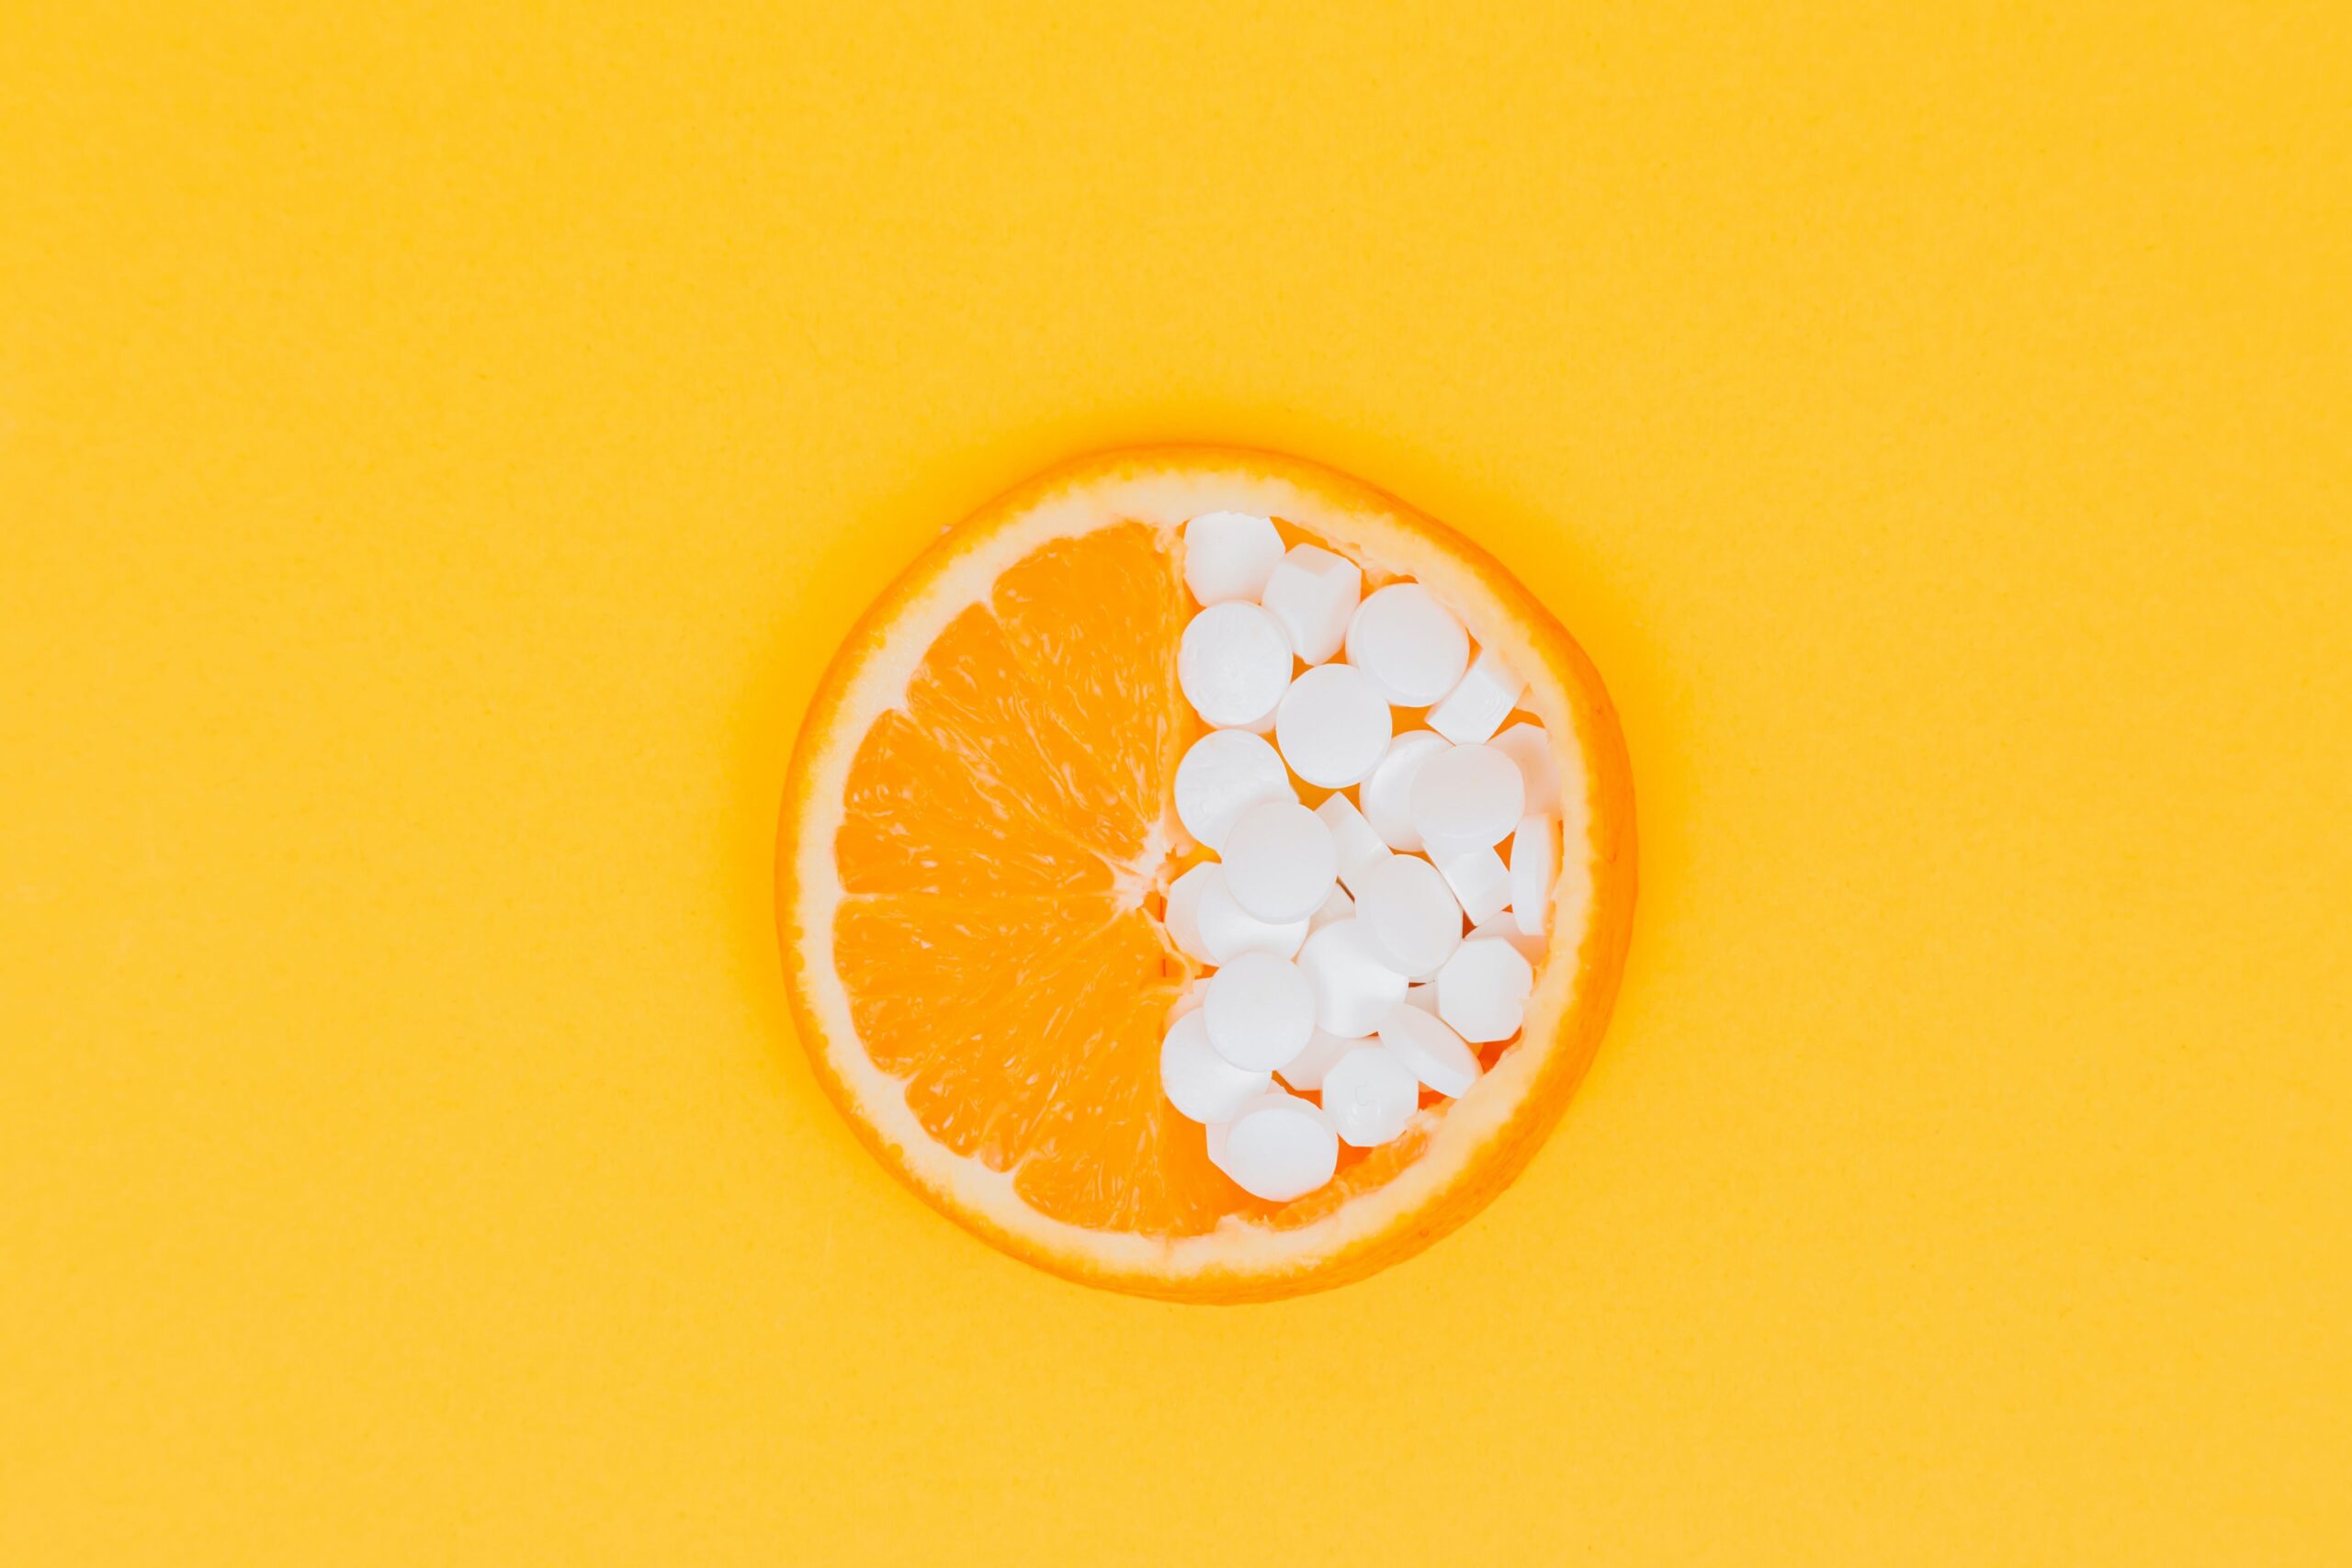 Are Vitamin C Supplements Really Effective?